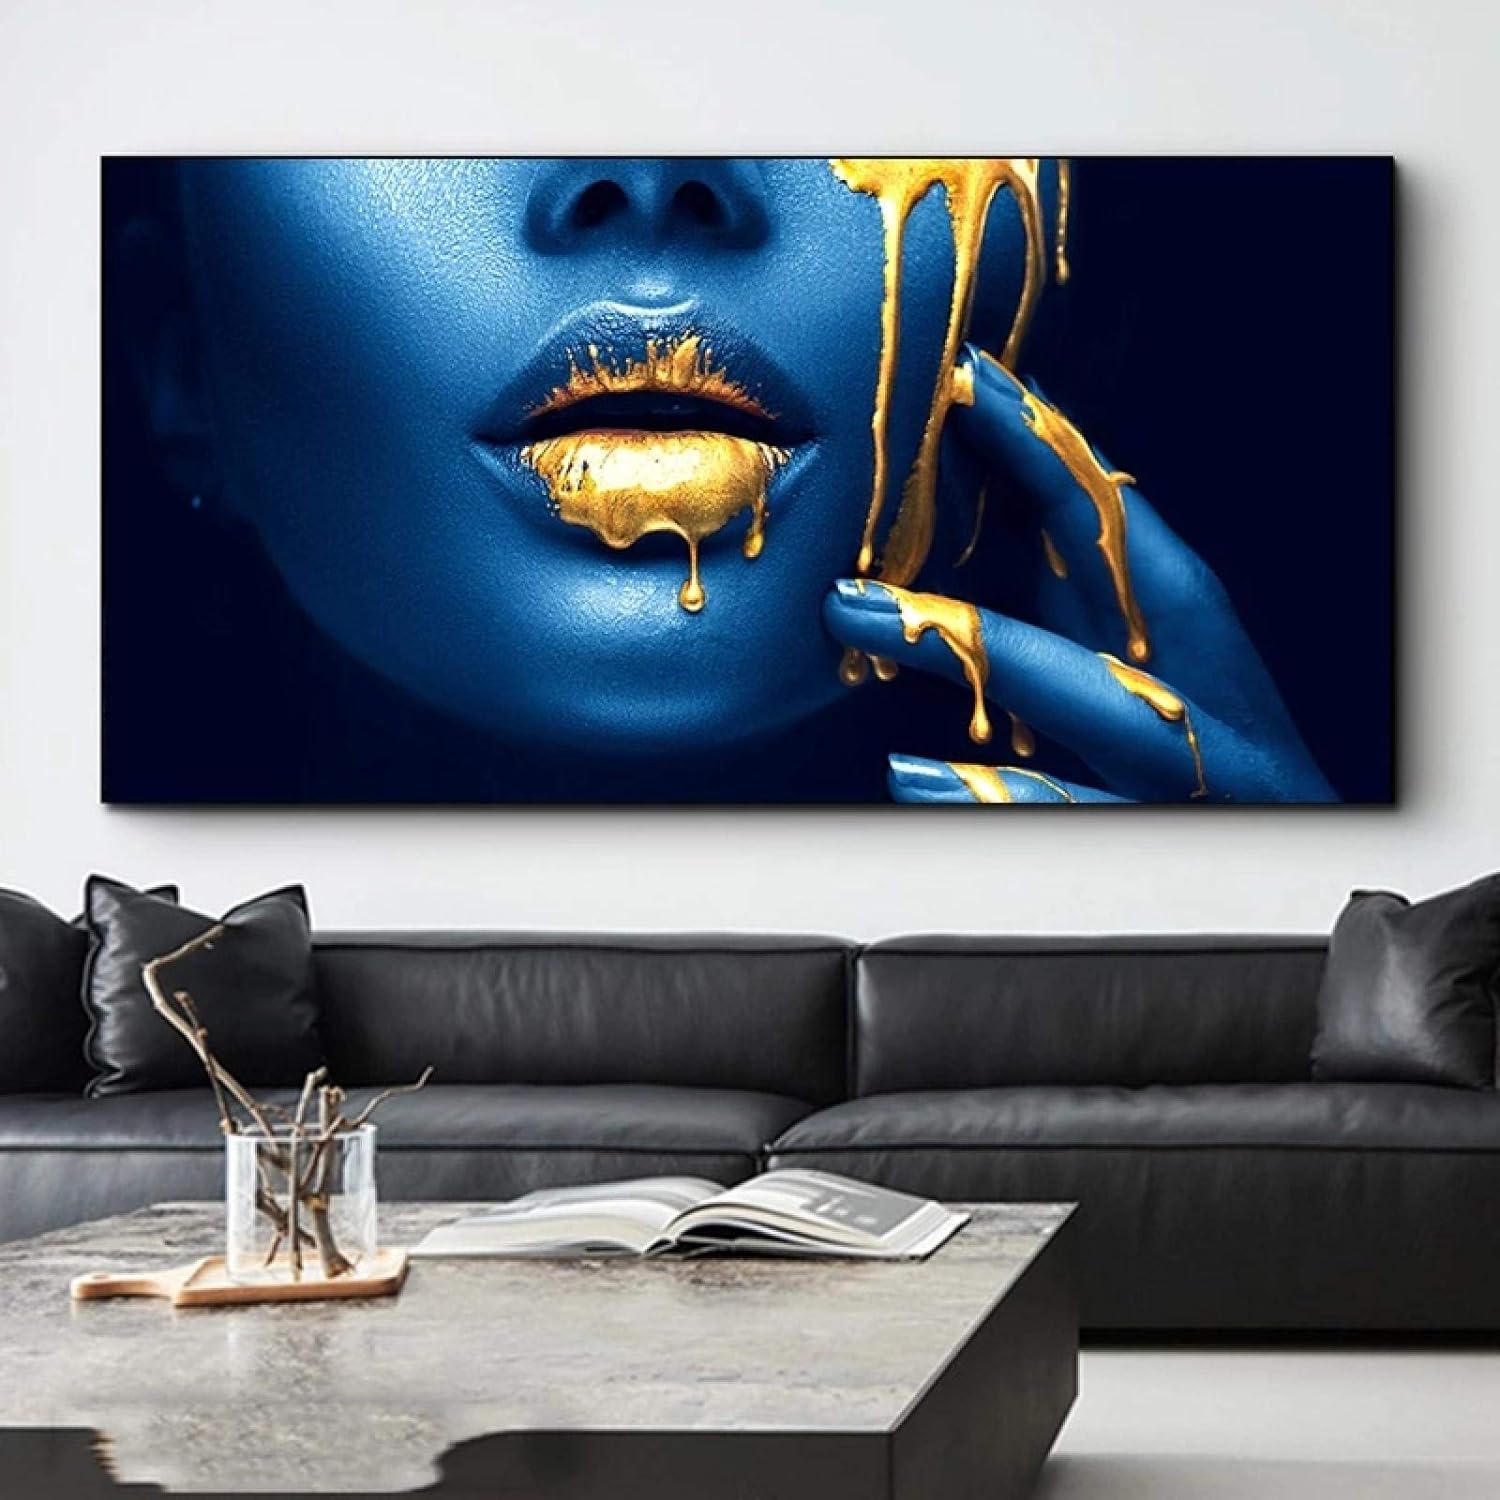 Seductive Blue: Lips with Gold Accents